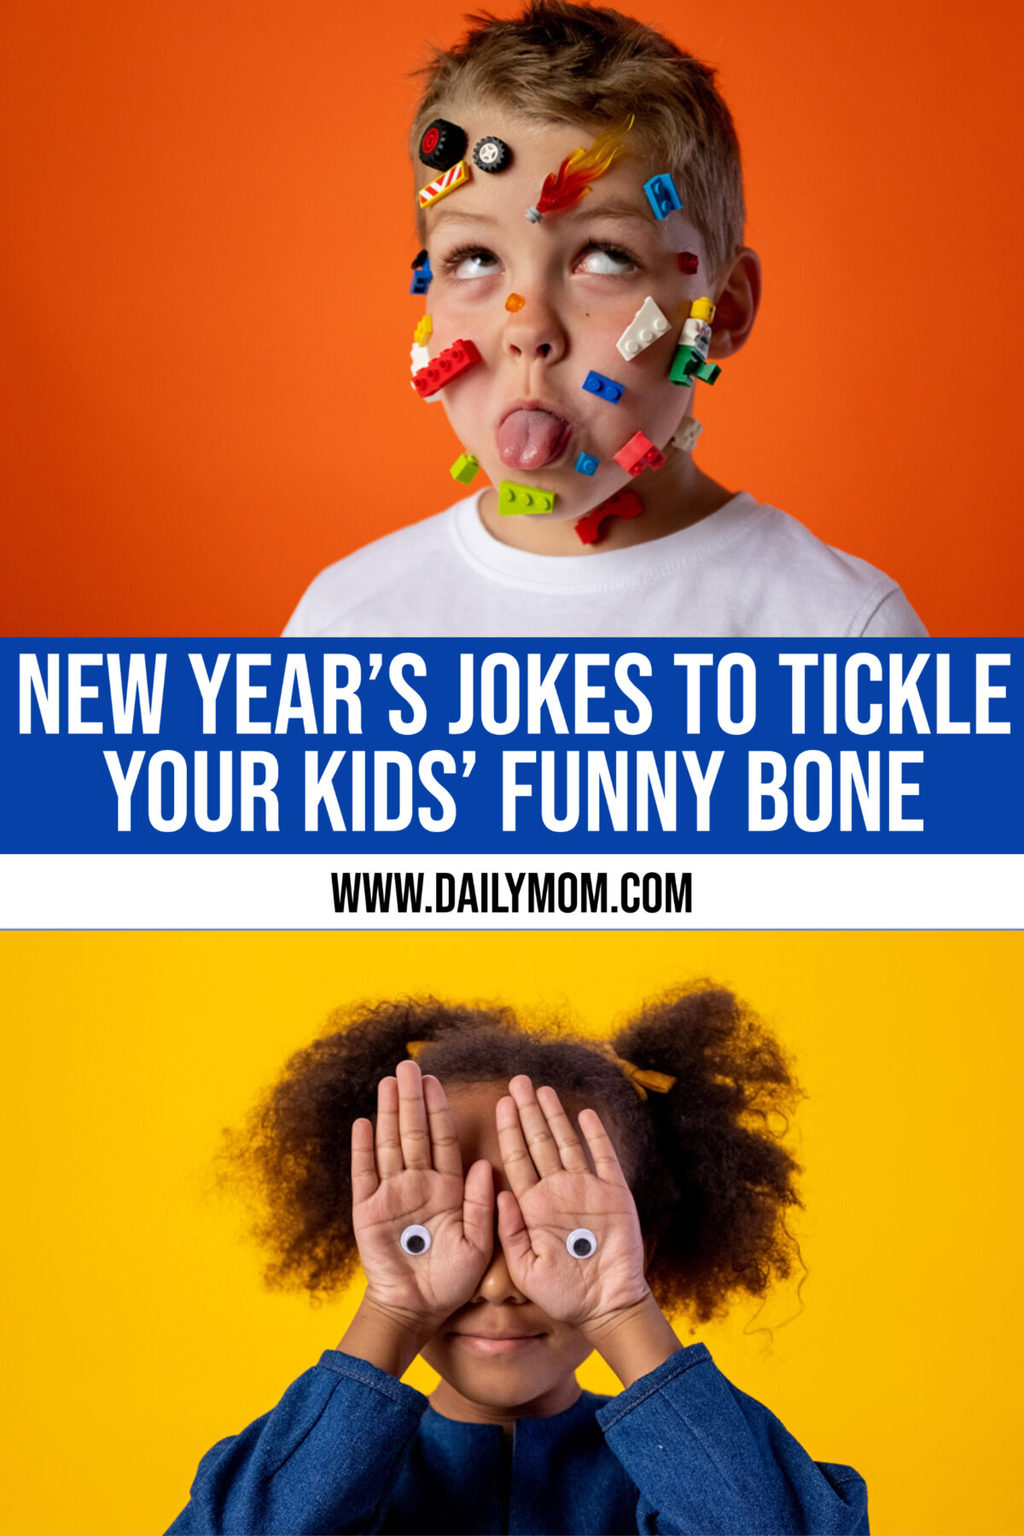 33 New Year’S Jokes To Tickle Your Kids’ Funny Bone